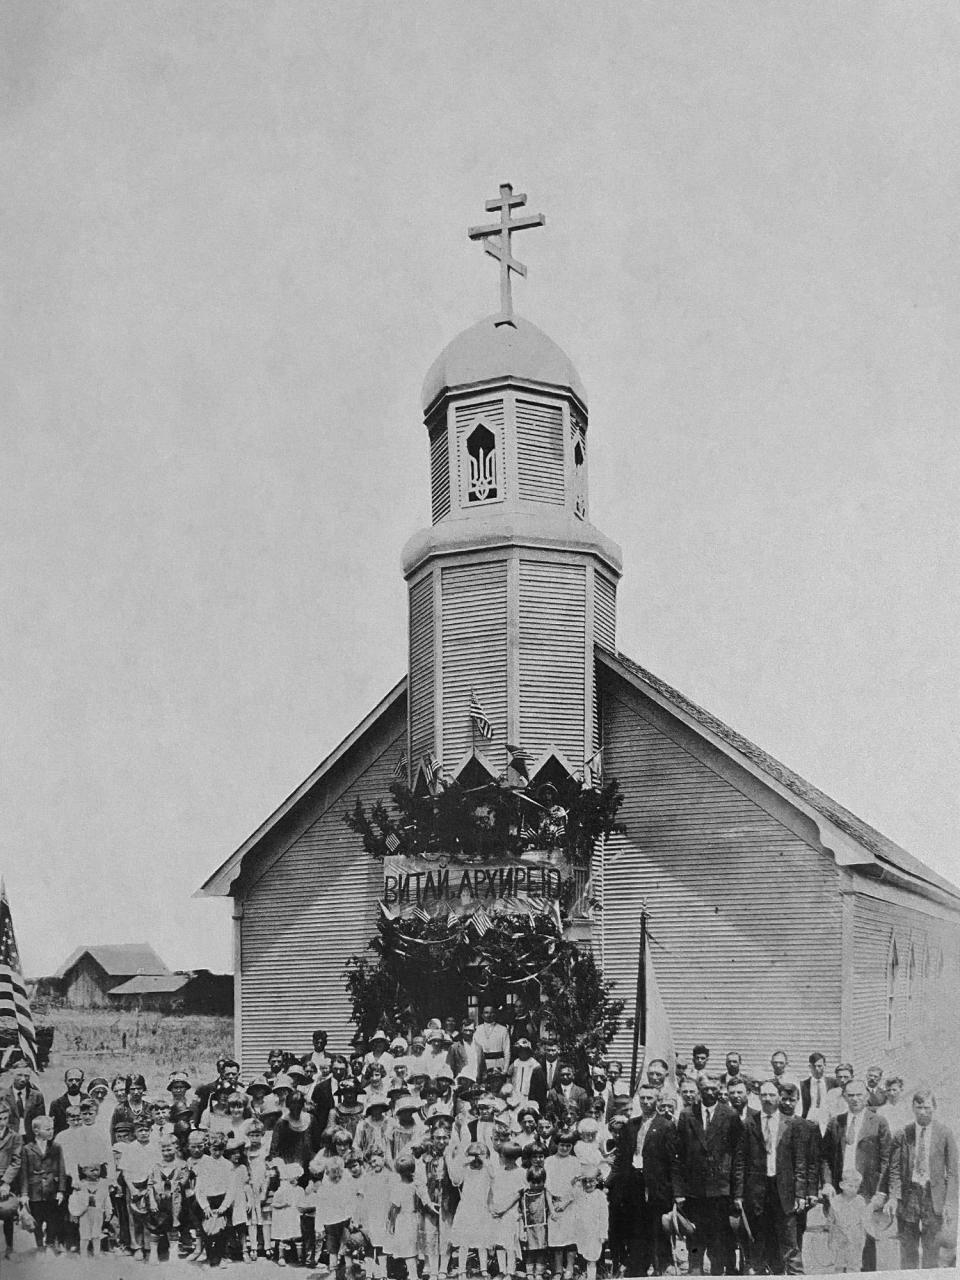 The thriving congregation of St. Mary Ukrainian Orthodox Church is shown in a photograph taken in 1925 during Bishop Ivan Theodorovich's visit to the house of worship that was then located in Harrah, Oklahoma.